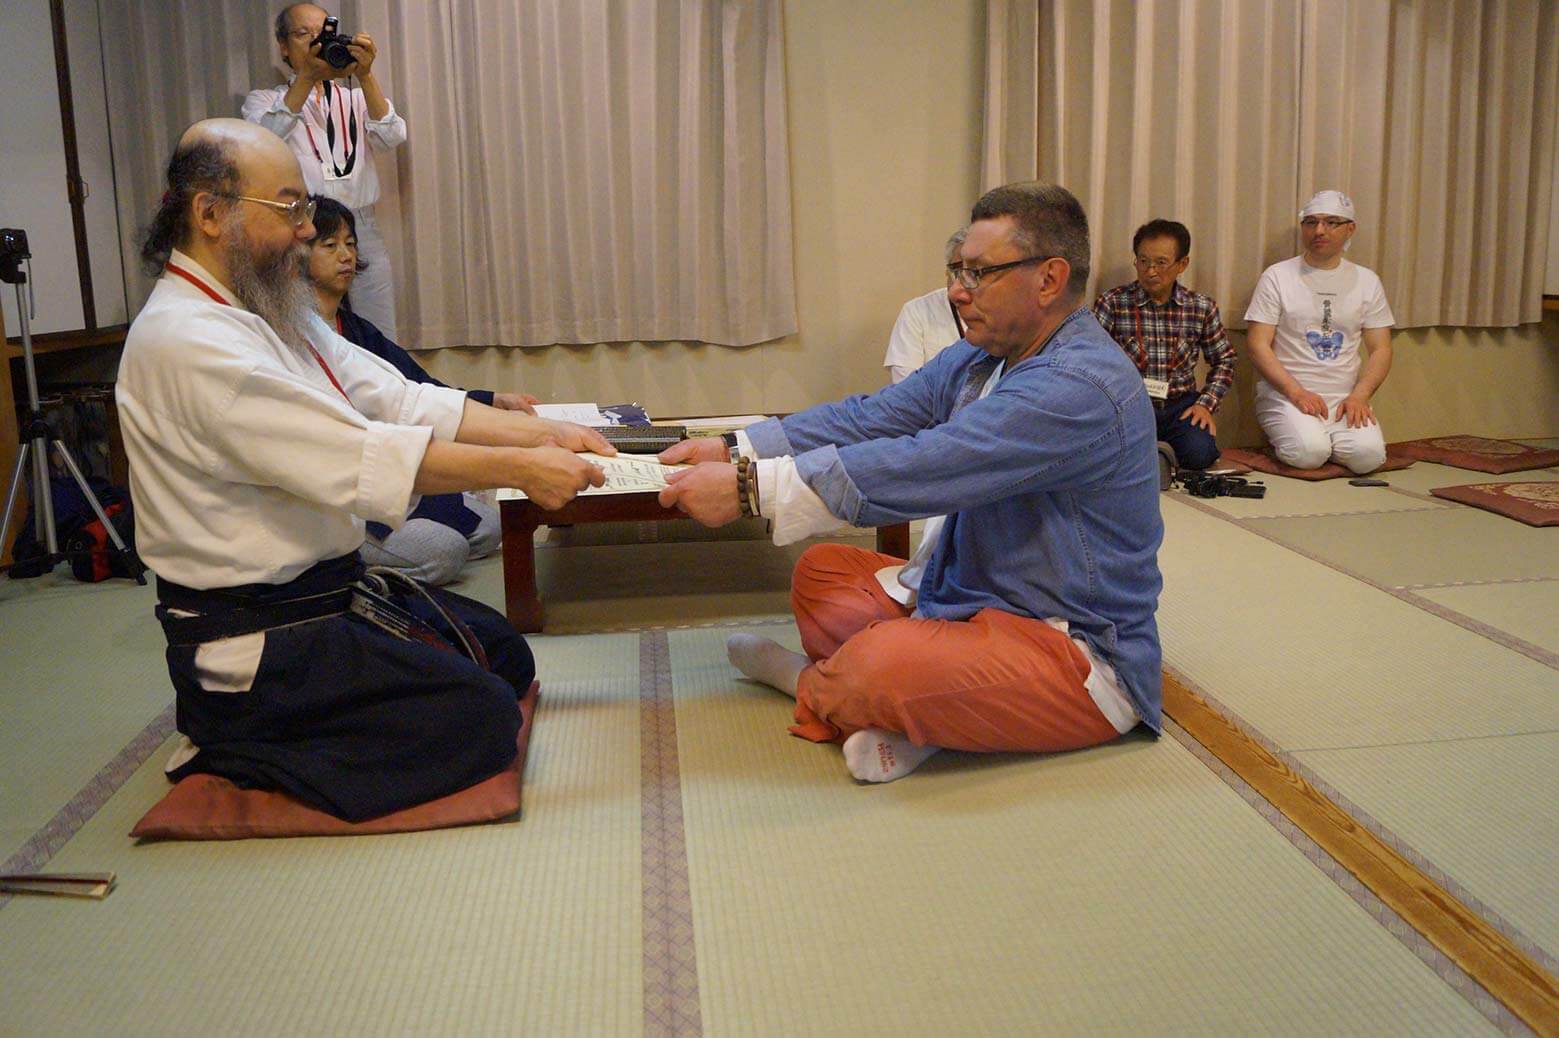 Yumeiho Therapy - Official Website of the Japanese Manual Therapy in the United States